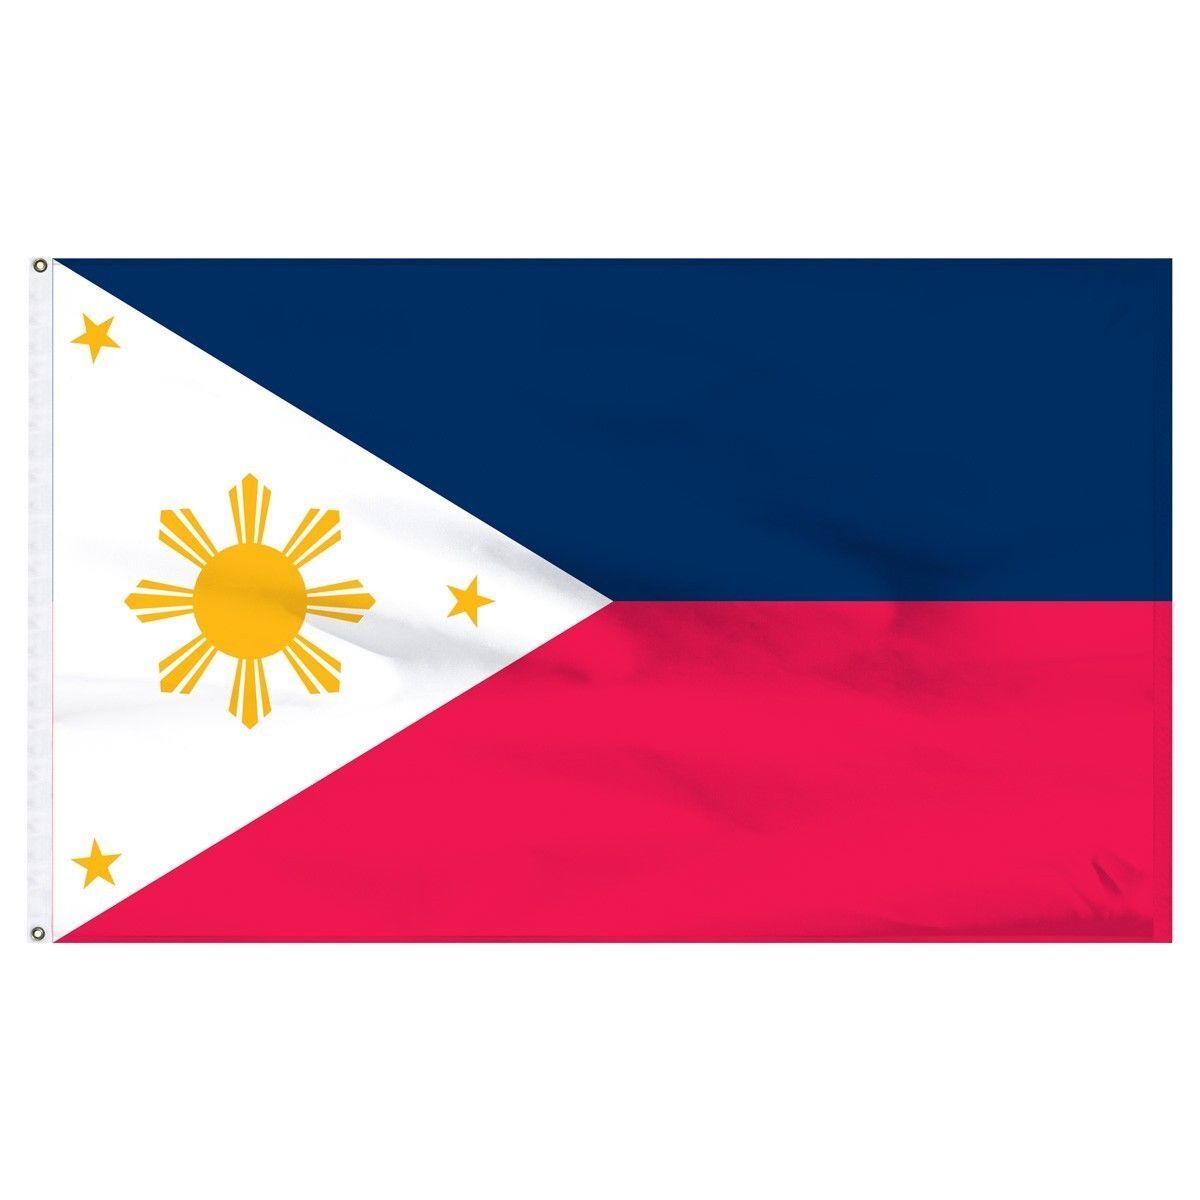 PHILIPPINES FLAG 2X3 FEET FILIPINO COUNTRY NATION BANNER NEW 100D